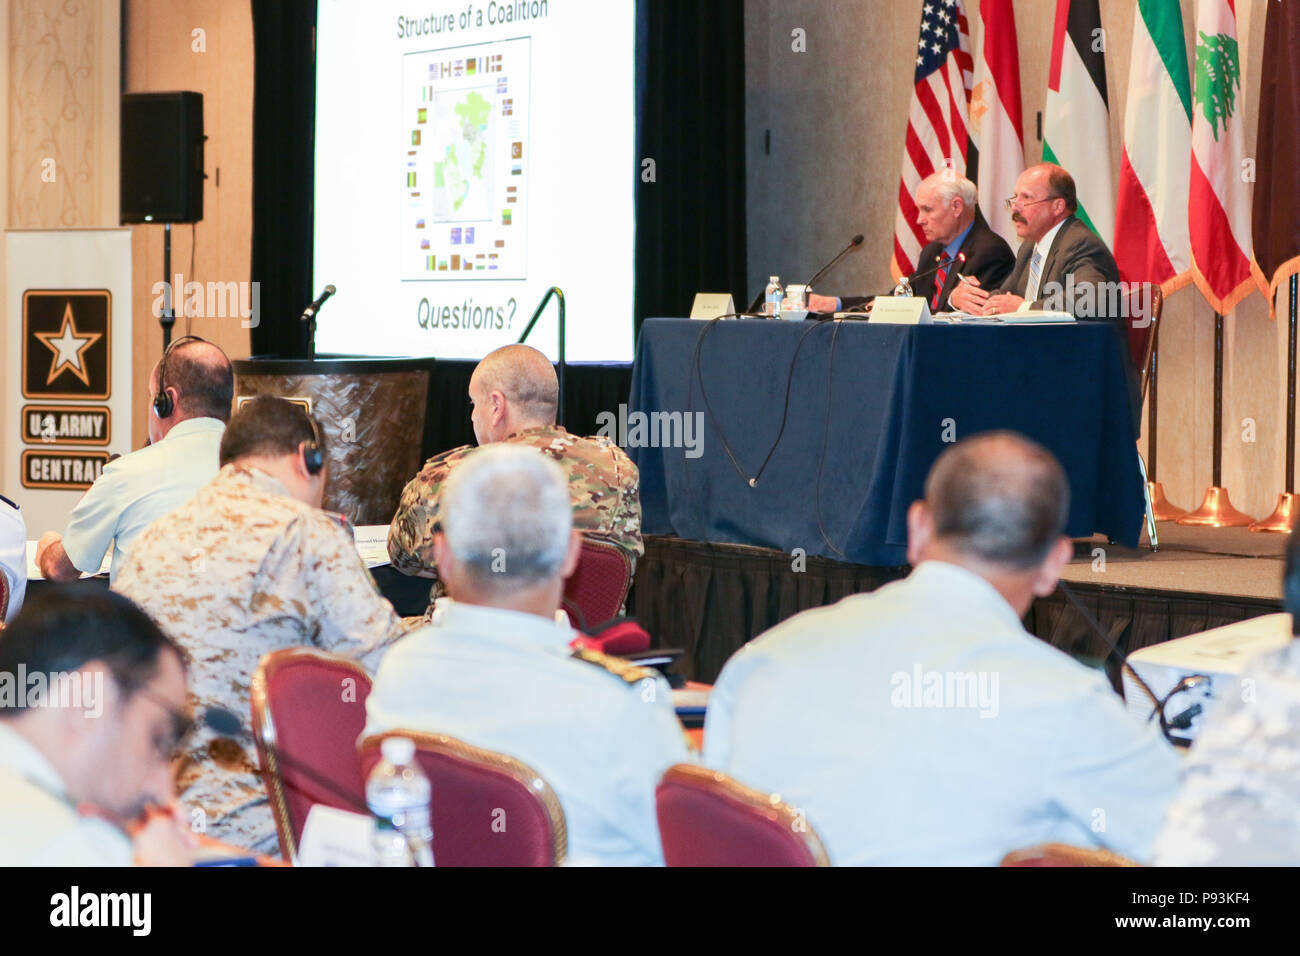 Dr. John A. Bonin, professor, and Dr. Gregory L. Cantwell, director of the Center for Strategic Leadership, U.S. Army War College, take questions after their presentation on “The Structure of a Coalition” at the 2018 Senior Strategy Session – Arabian Peninsula / Levant in Arlington, Va, July 10, 2018. The conference promoted the successes of ongoing coalition action against emerging threats and improved shared understanding of regional land force counterparts to invest in the right capabilities to achieve better interoperability and greater effectiveness in pursuing mutual national interests.  Stock Photo